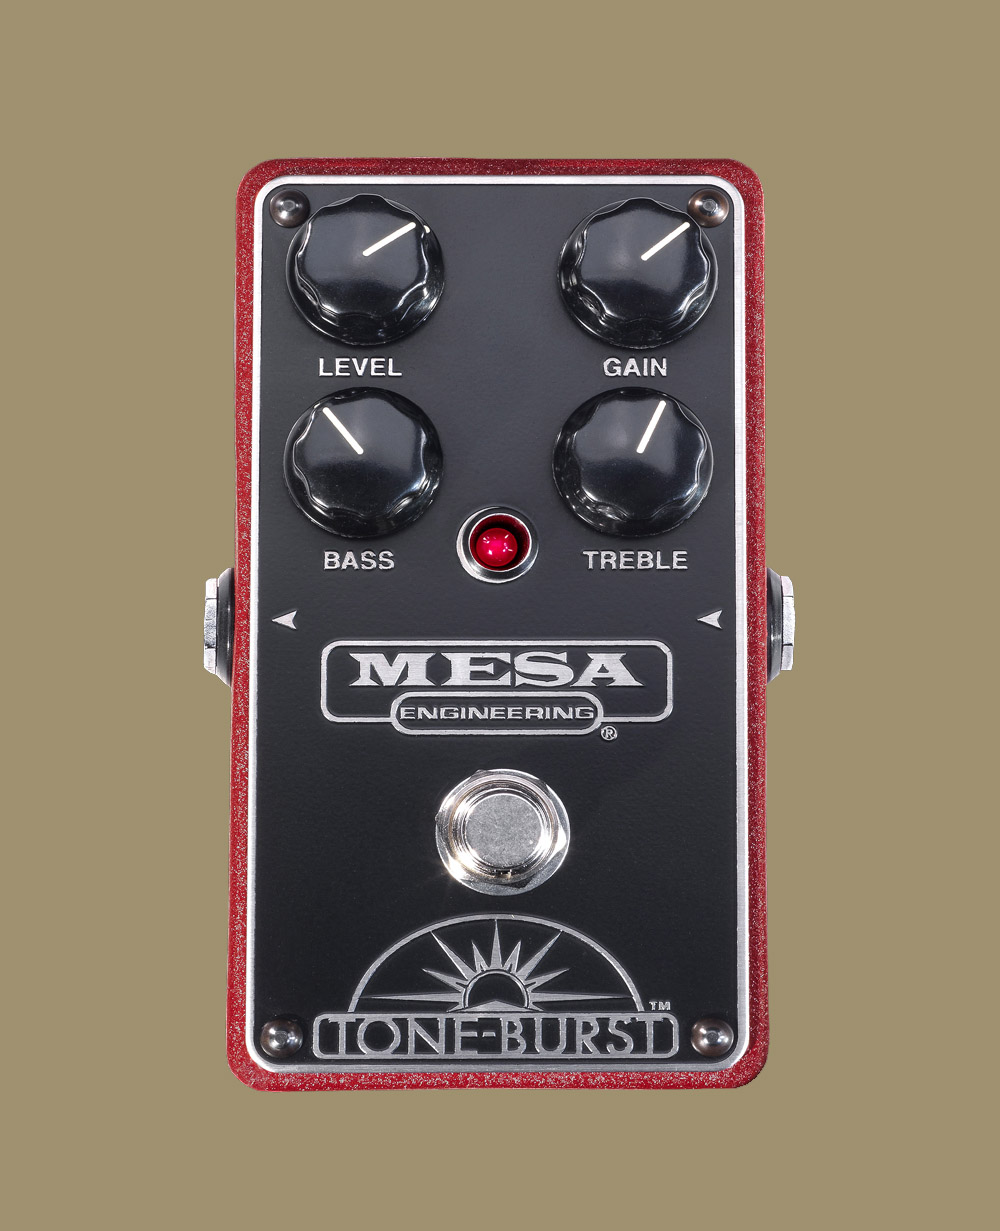 dak voor condoom Introducing: Four New Drive and Distortion Pedals from Mesa Engineering |  MESA/Boogie®